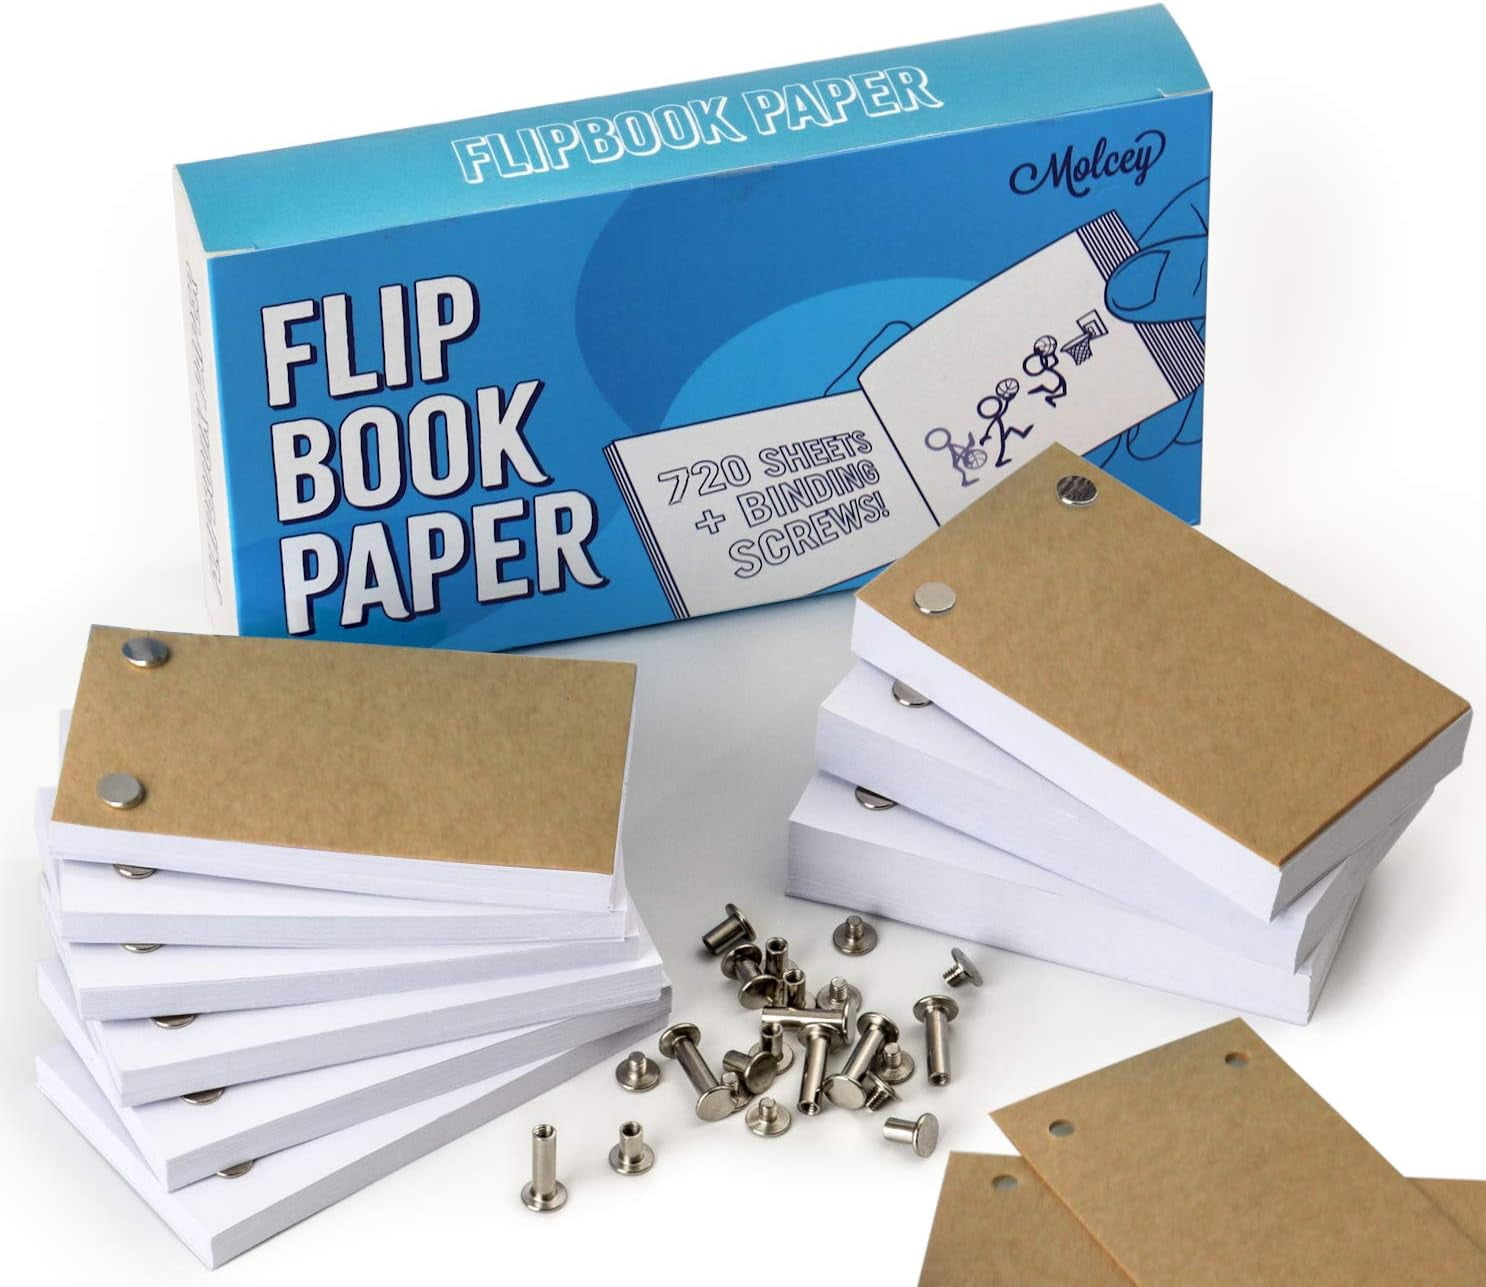 Official 'S Flipbook 8X Paper Pack Refill Sheets for the Flipbook Kit. 480  Shee